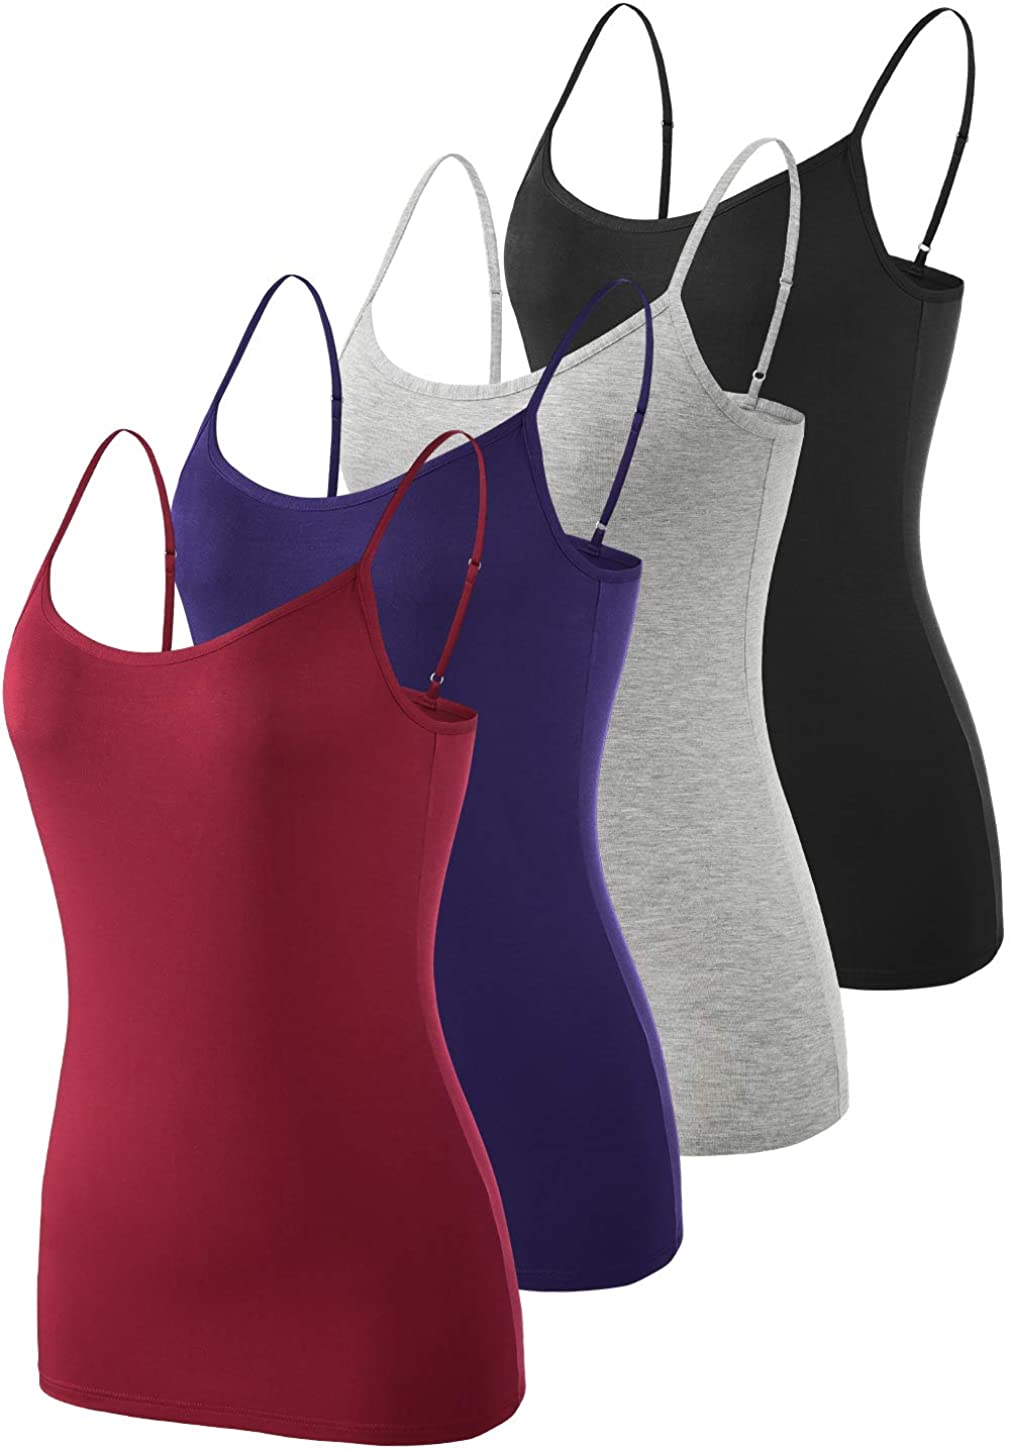 1pc Women's Strap Tank Top Back Support Comfortable & Invisible